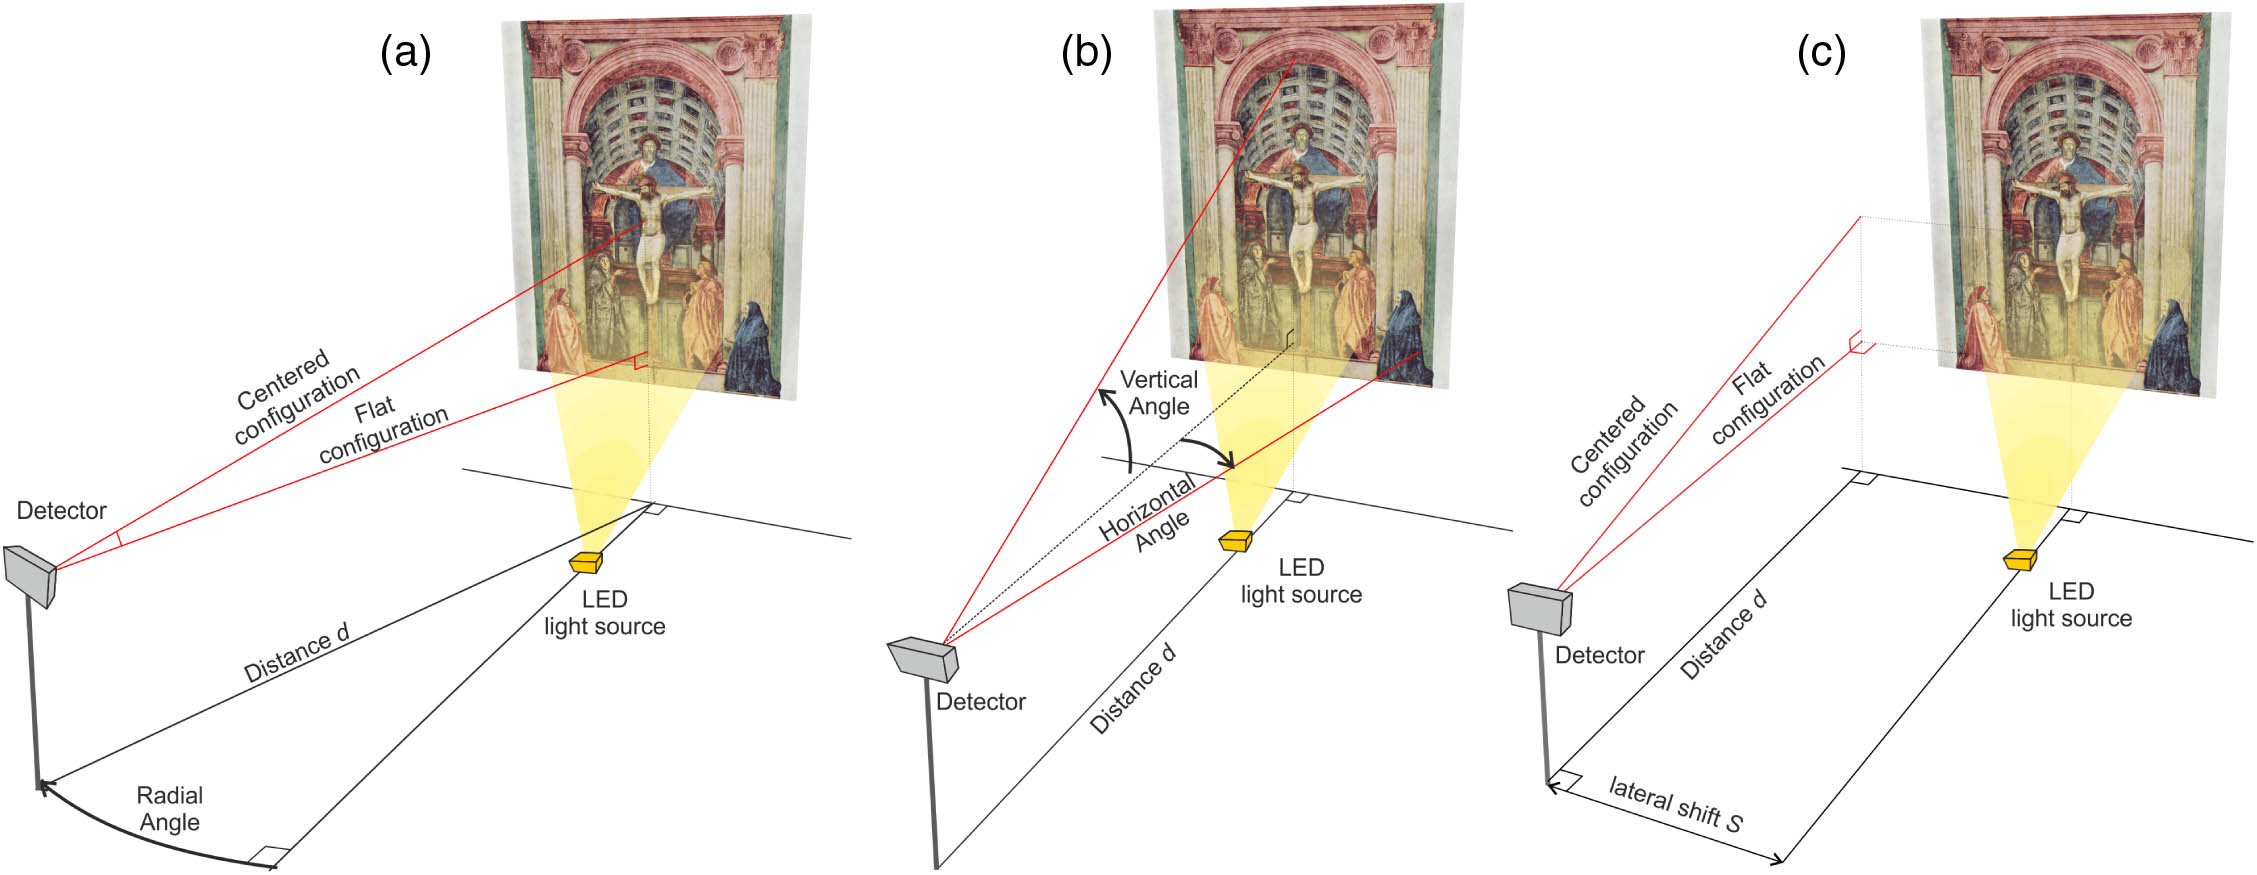 Sketch of the experimental campaign. A custom detector is placed at various distances/angles from a specific artwork. The three panels represent different measurement configurations: (a) polar measurement, (b) FoV characterization, and (c) evaluation of lateral shift influence. The centered configuration is obtained aiming the detector’s optical axis toward the geometrical center of the painting; in the flat configuration the detector’s optical axis is parallel to the floor.